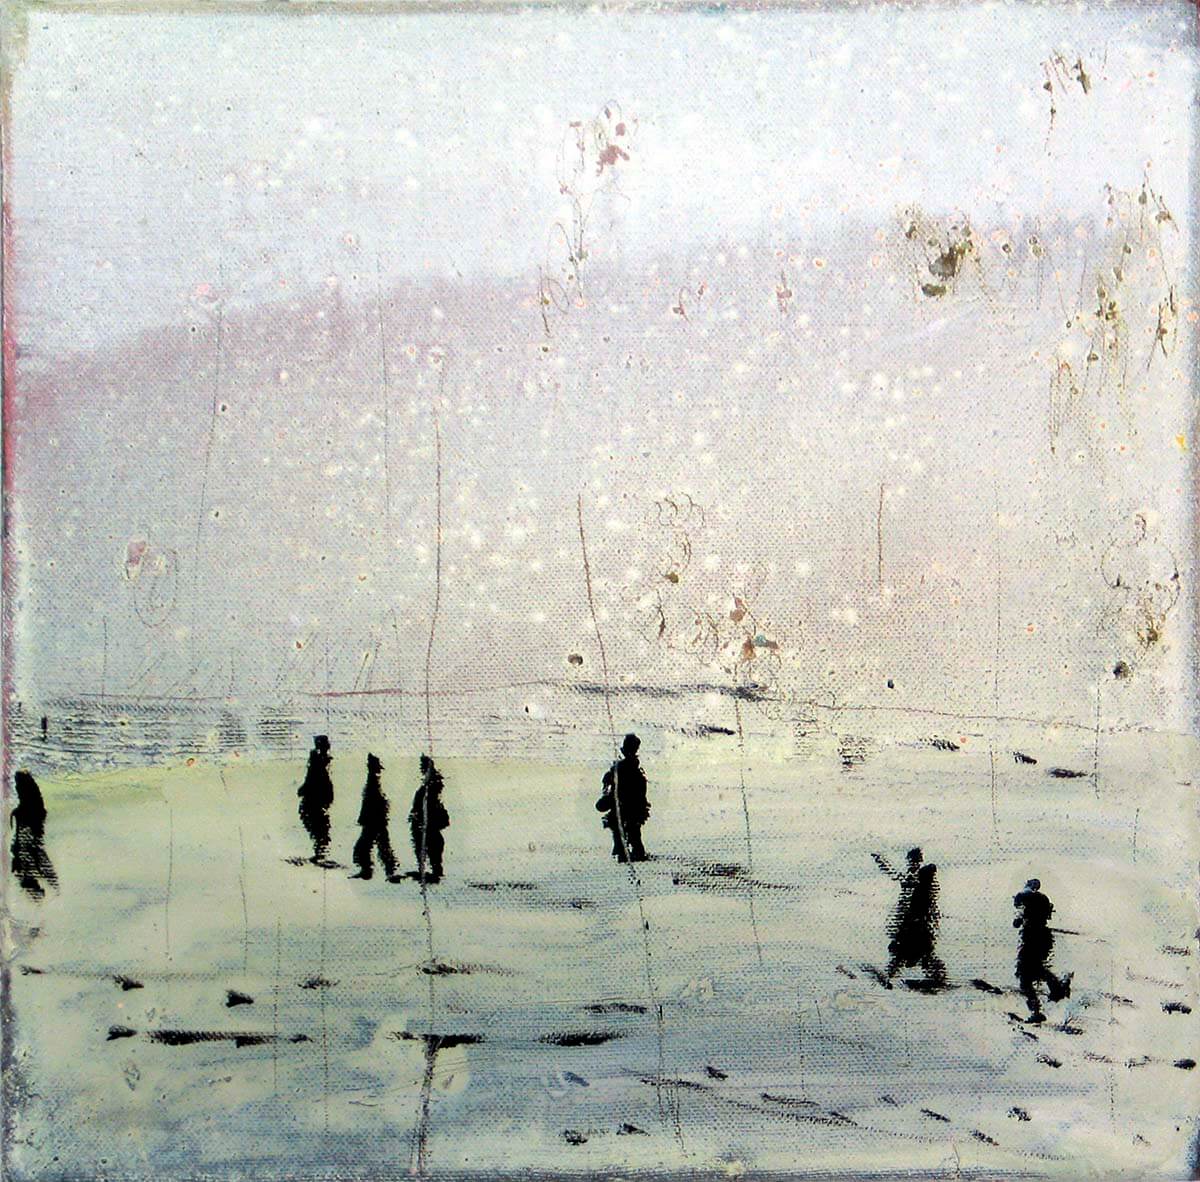 A washed out landscape painting with small black figures of people walking by artist Elizabeth Magill